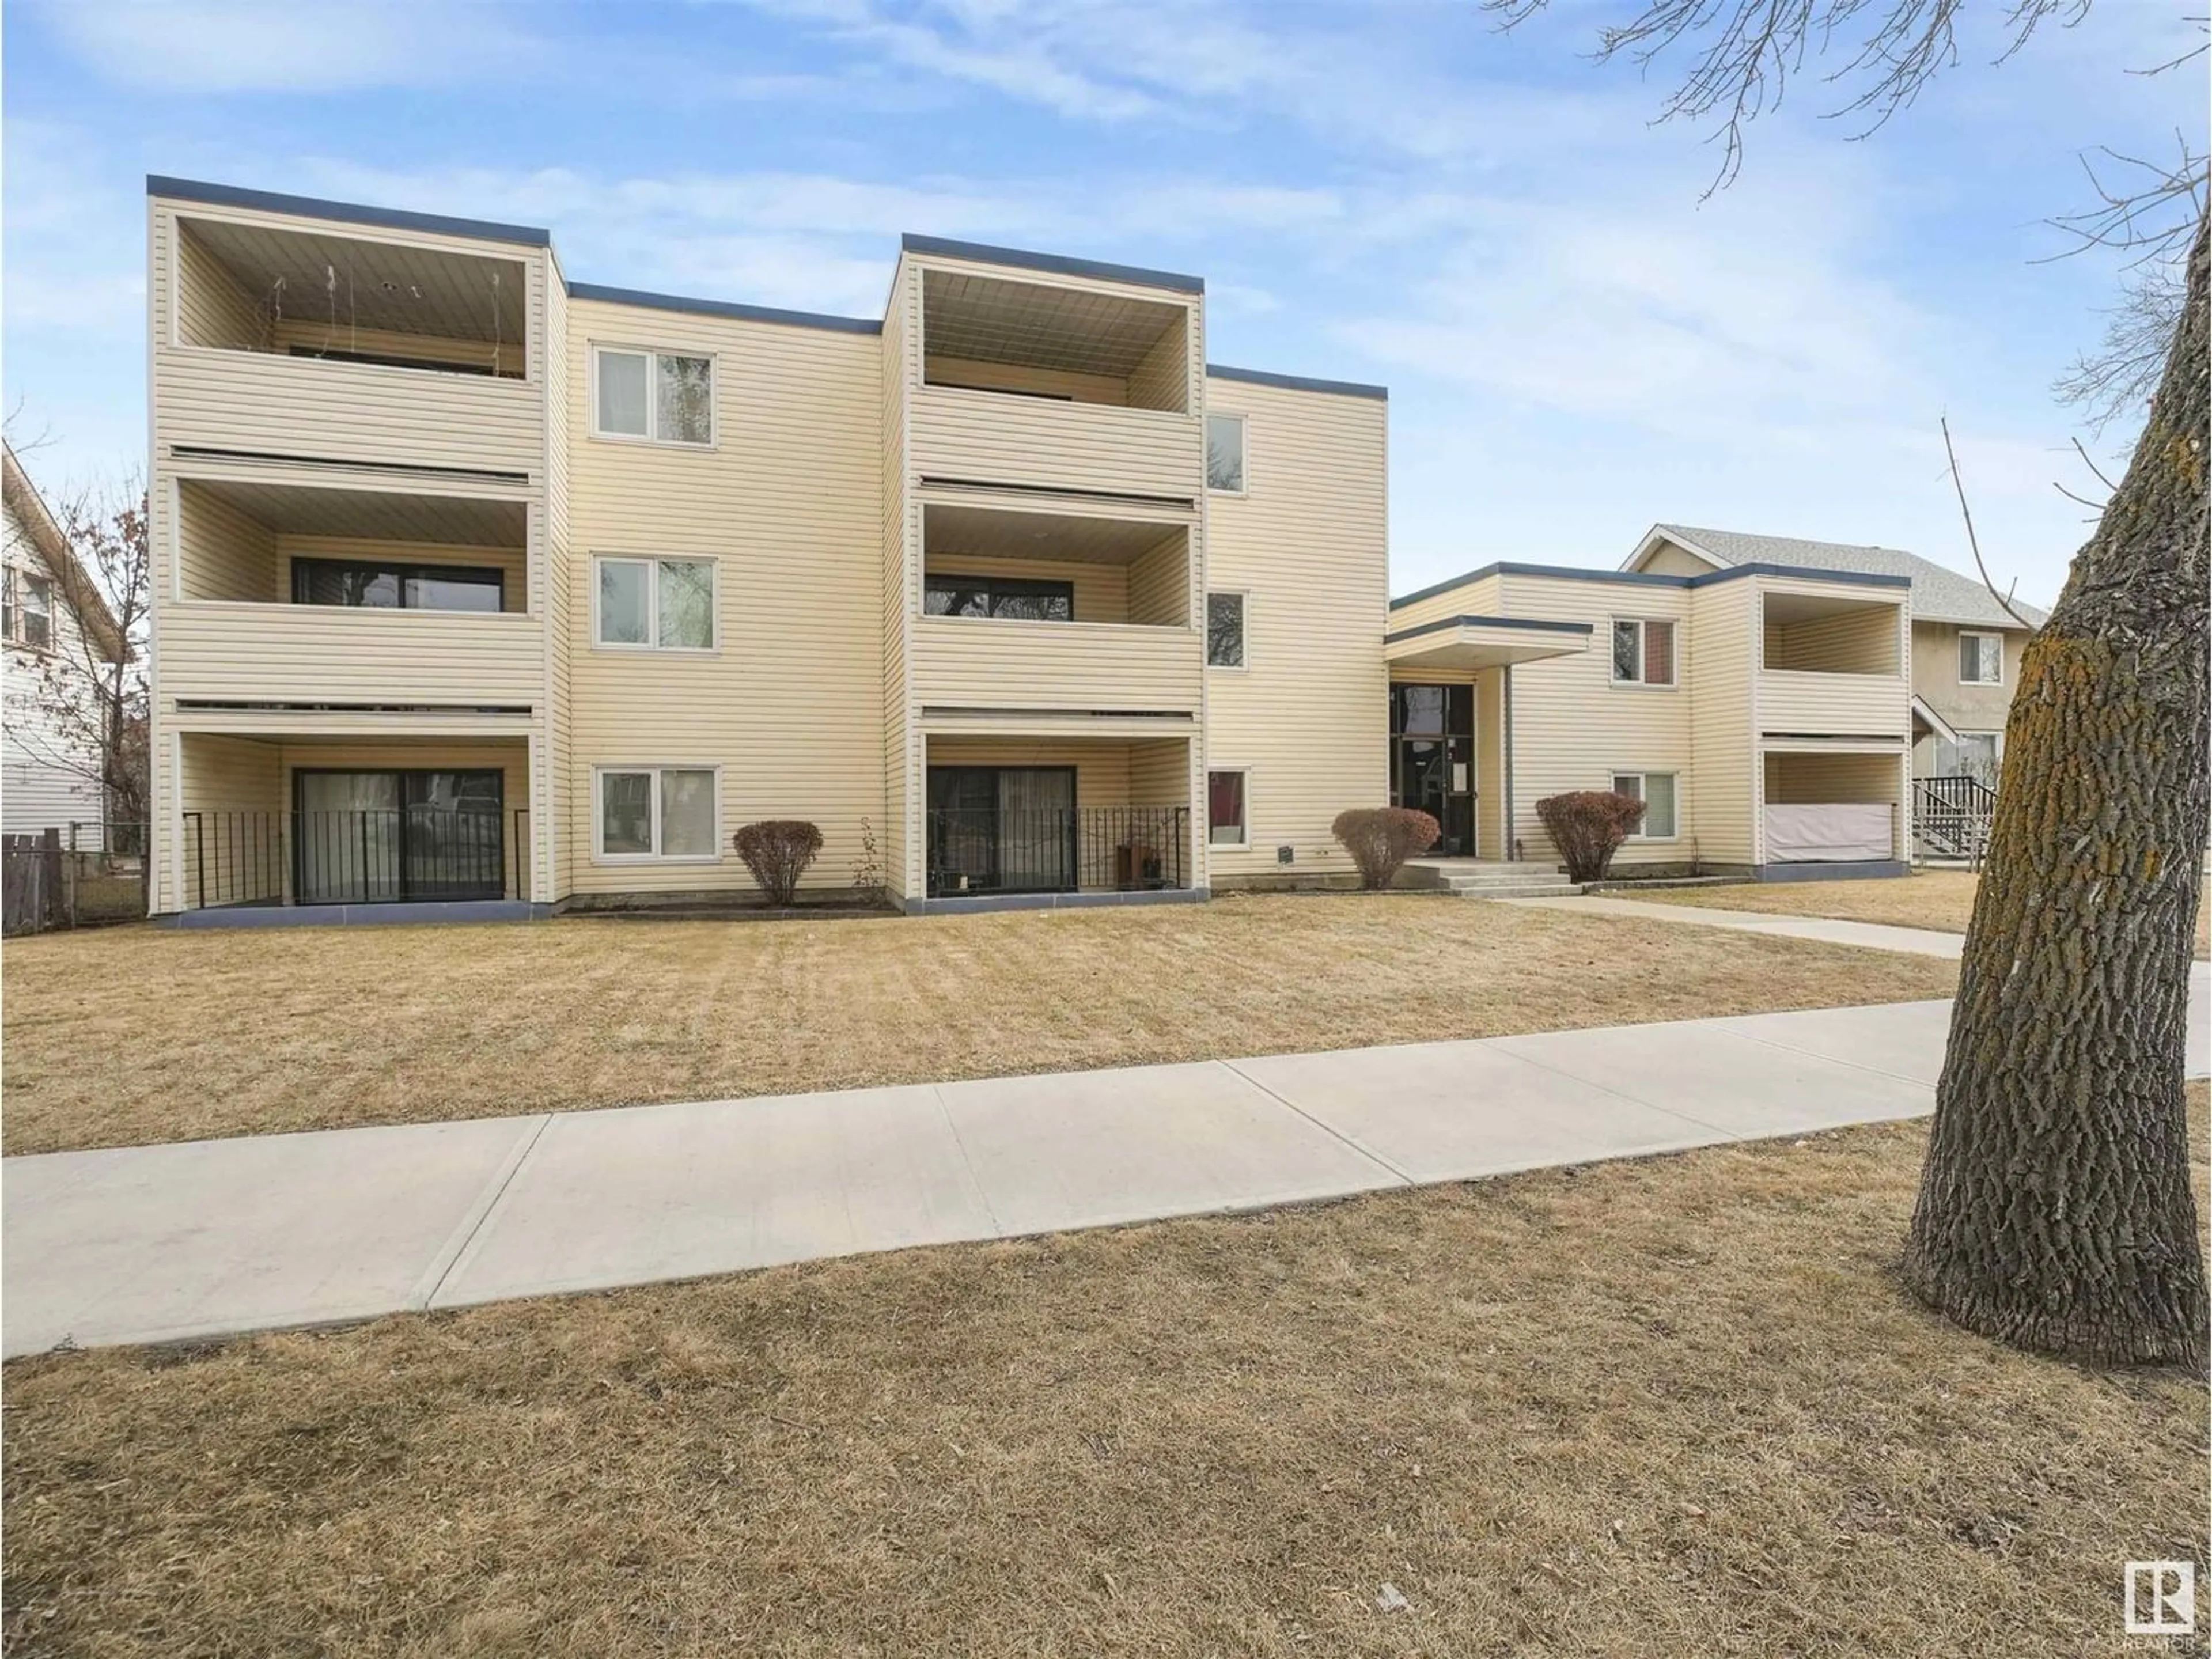 A pic from exterior of the house or condo for #301 11043 108 ST NW, Edmonton Alberta T5H3A8